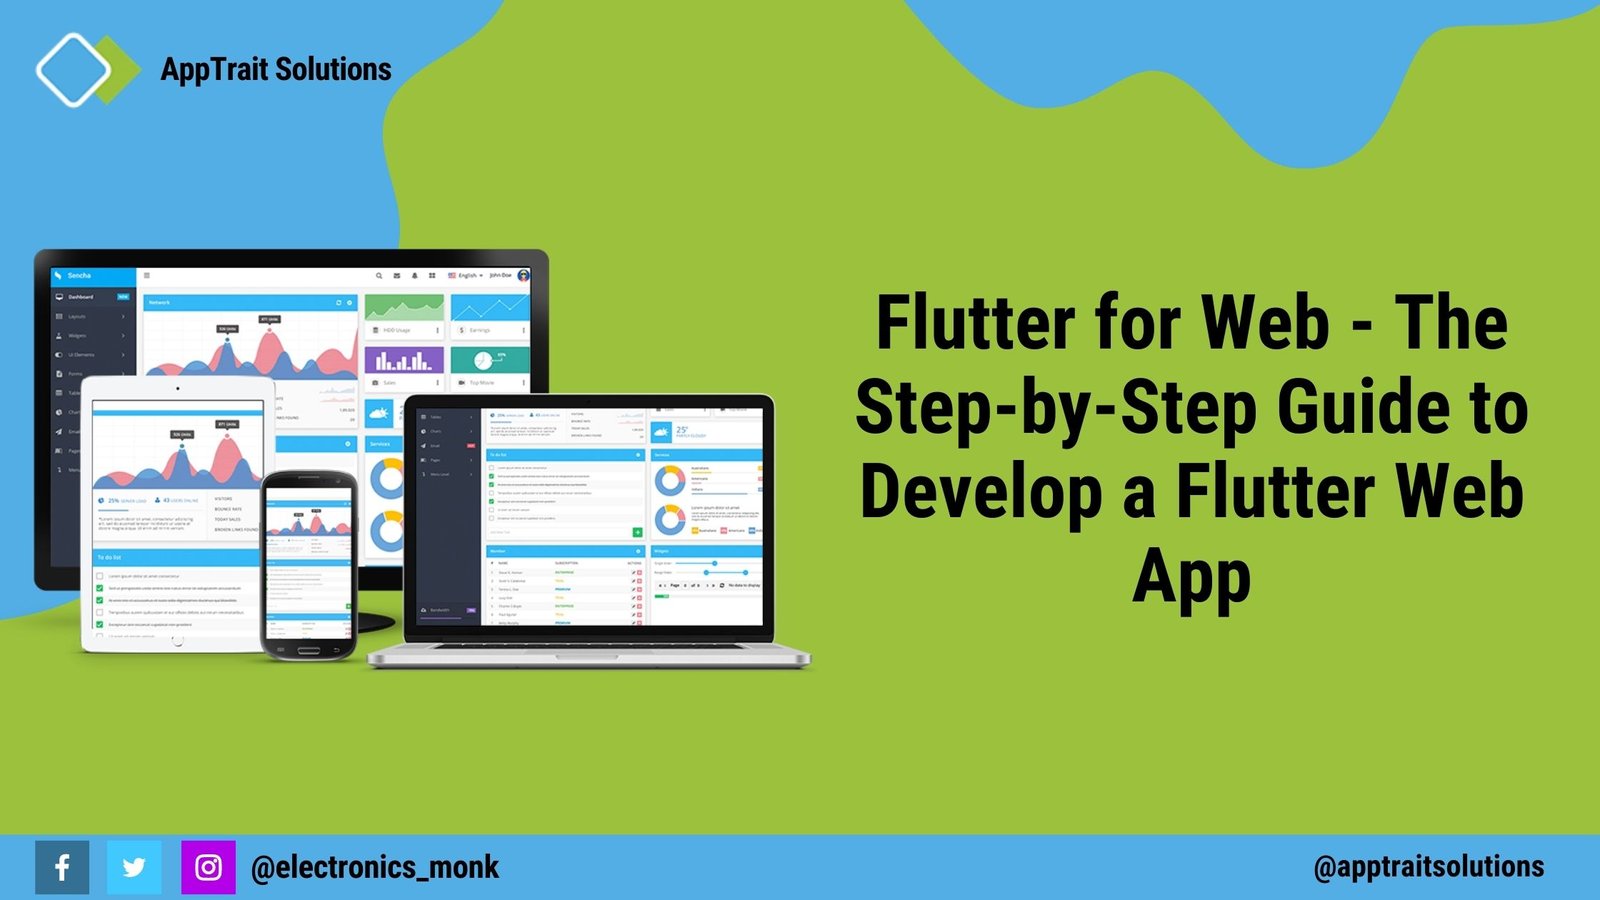 Flutter for Web - The Step-by-Step Guide to Develop a Flutter Web App